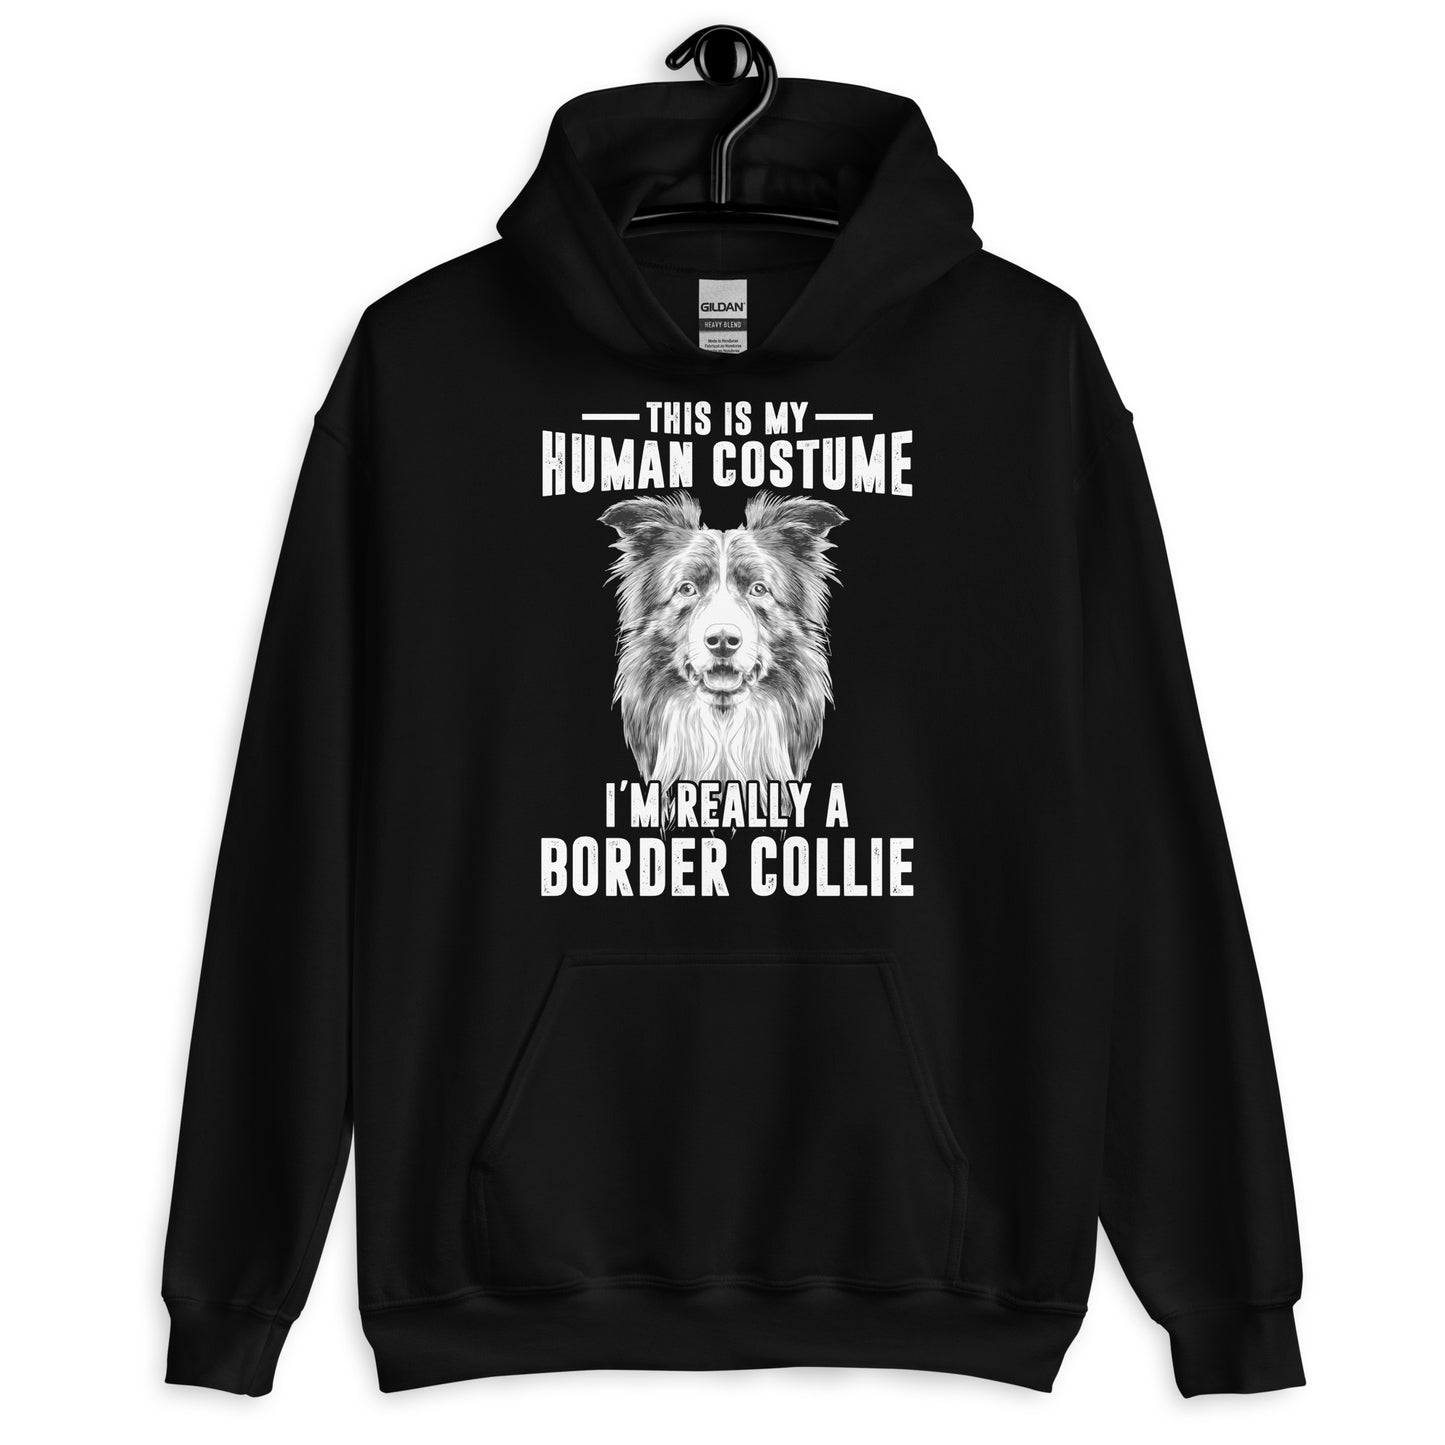 I'm really a Border Collie Hoodie